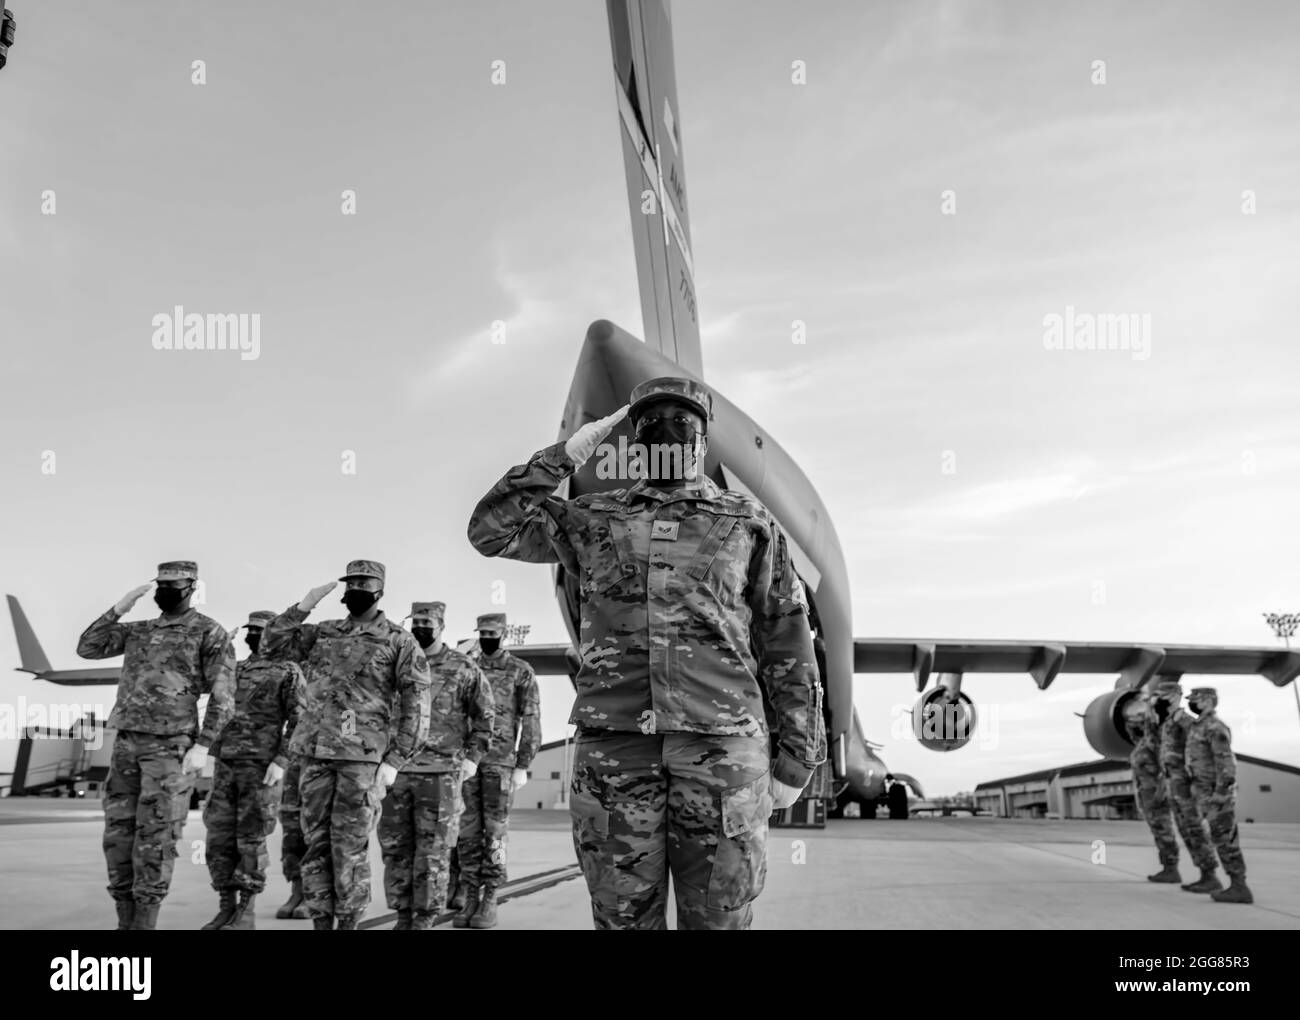 https://c8.alamy.com/comp/2GG85R3/air-force-mortuary-affairs-operations-staff-salute-a-training-transfer-case-during-nighttime-dignified-transfer-training-at-dover-air-force-base-delaware-march-30-2021-training-events-help-carry-teams-prepare-to-honor-fallen-service-members-when-they-return-to-the-us-at-dover-afb-us-air-force-photo-by-airman-1st-class-faith-schaefer-2GG85R3.jpg